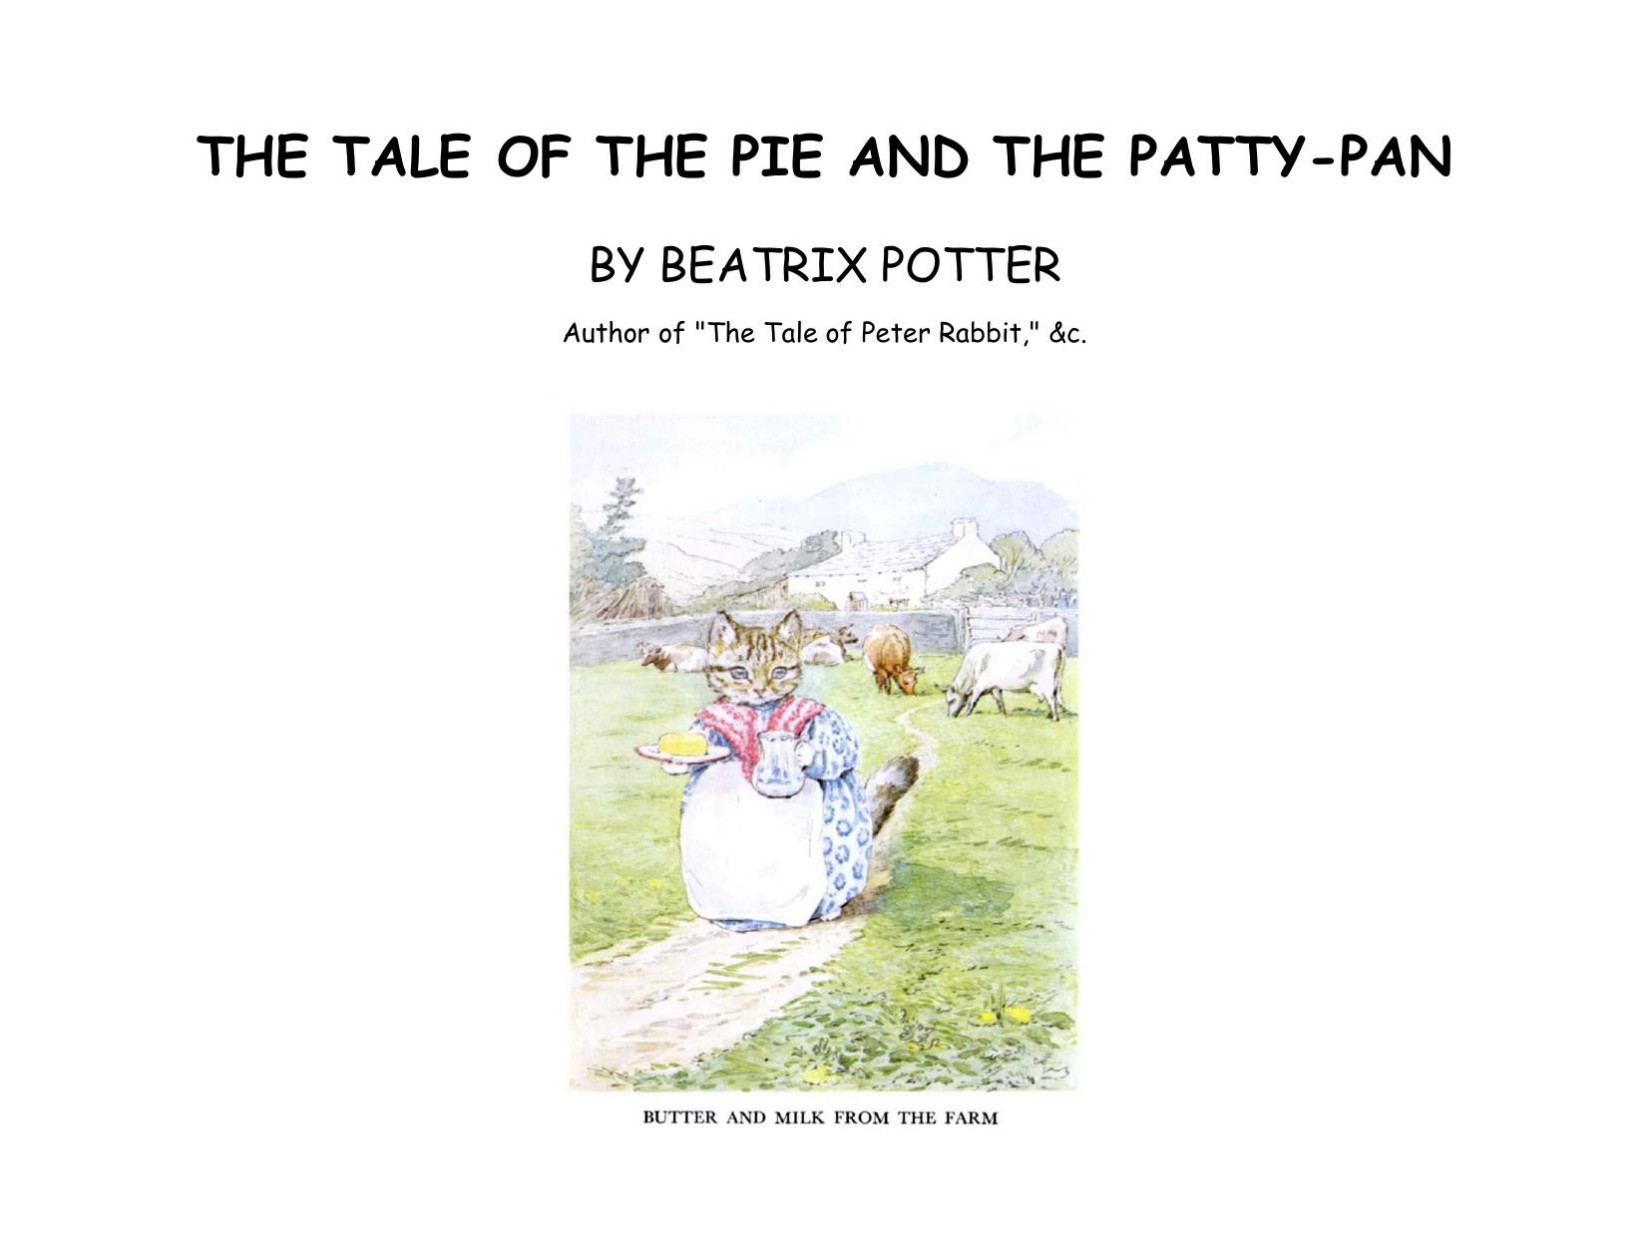 The Tale of the Pie and the Pattty - Pan